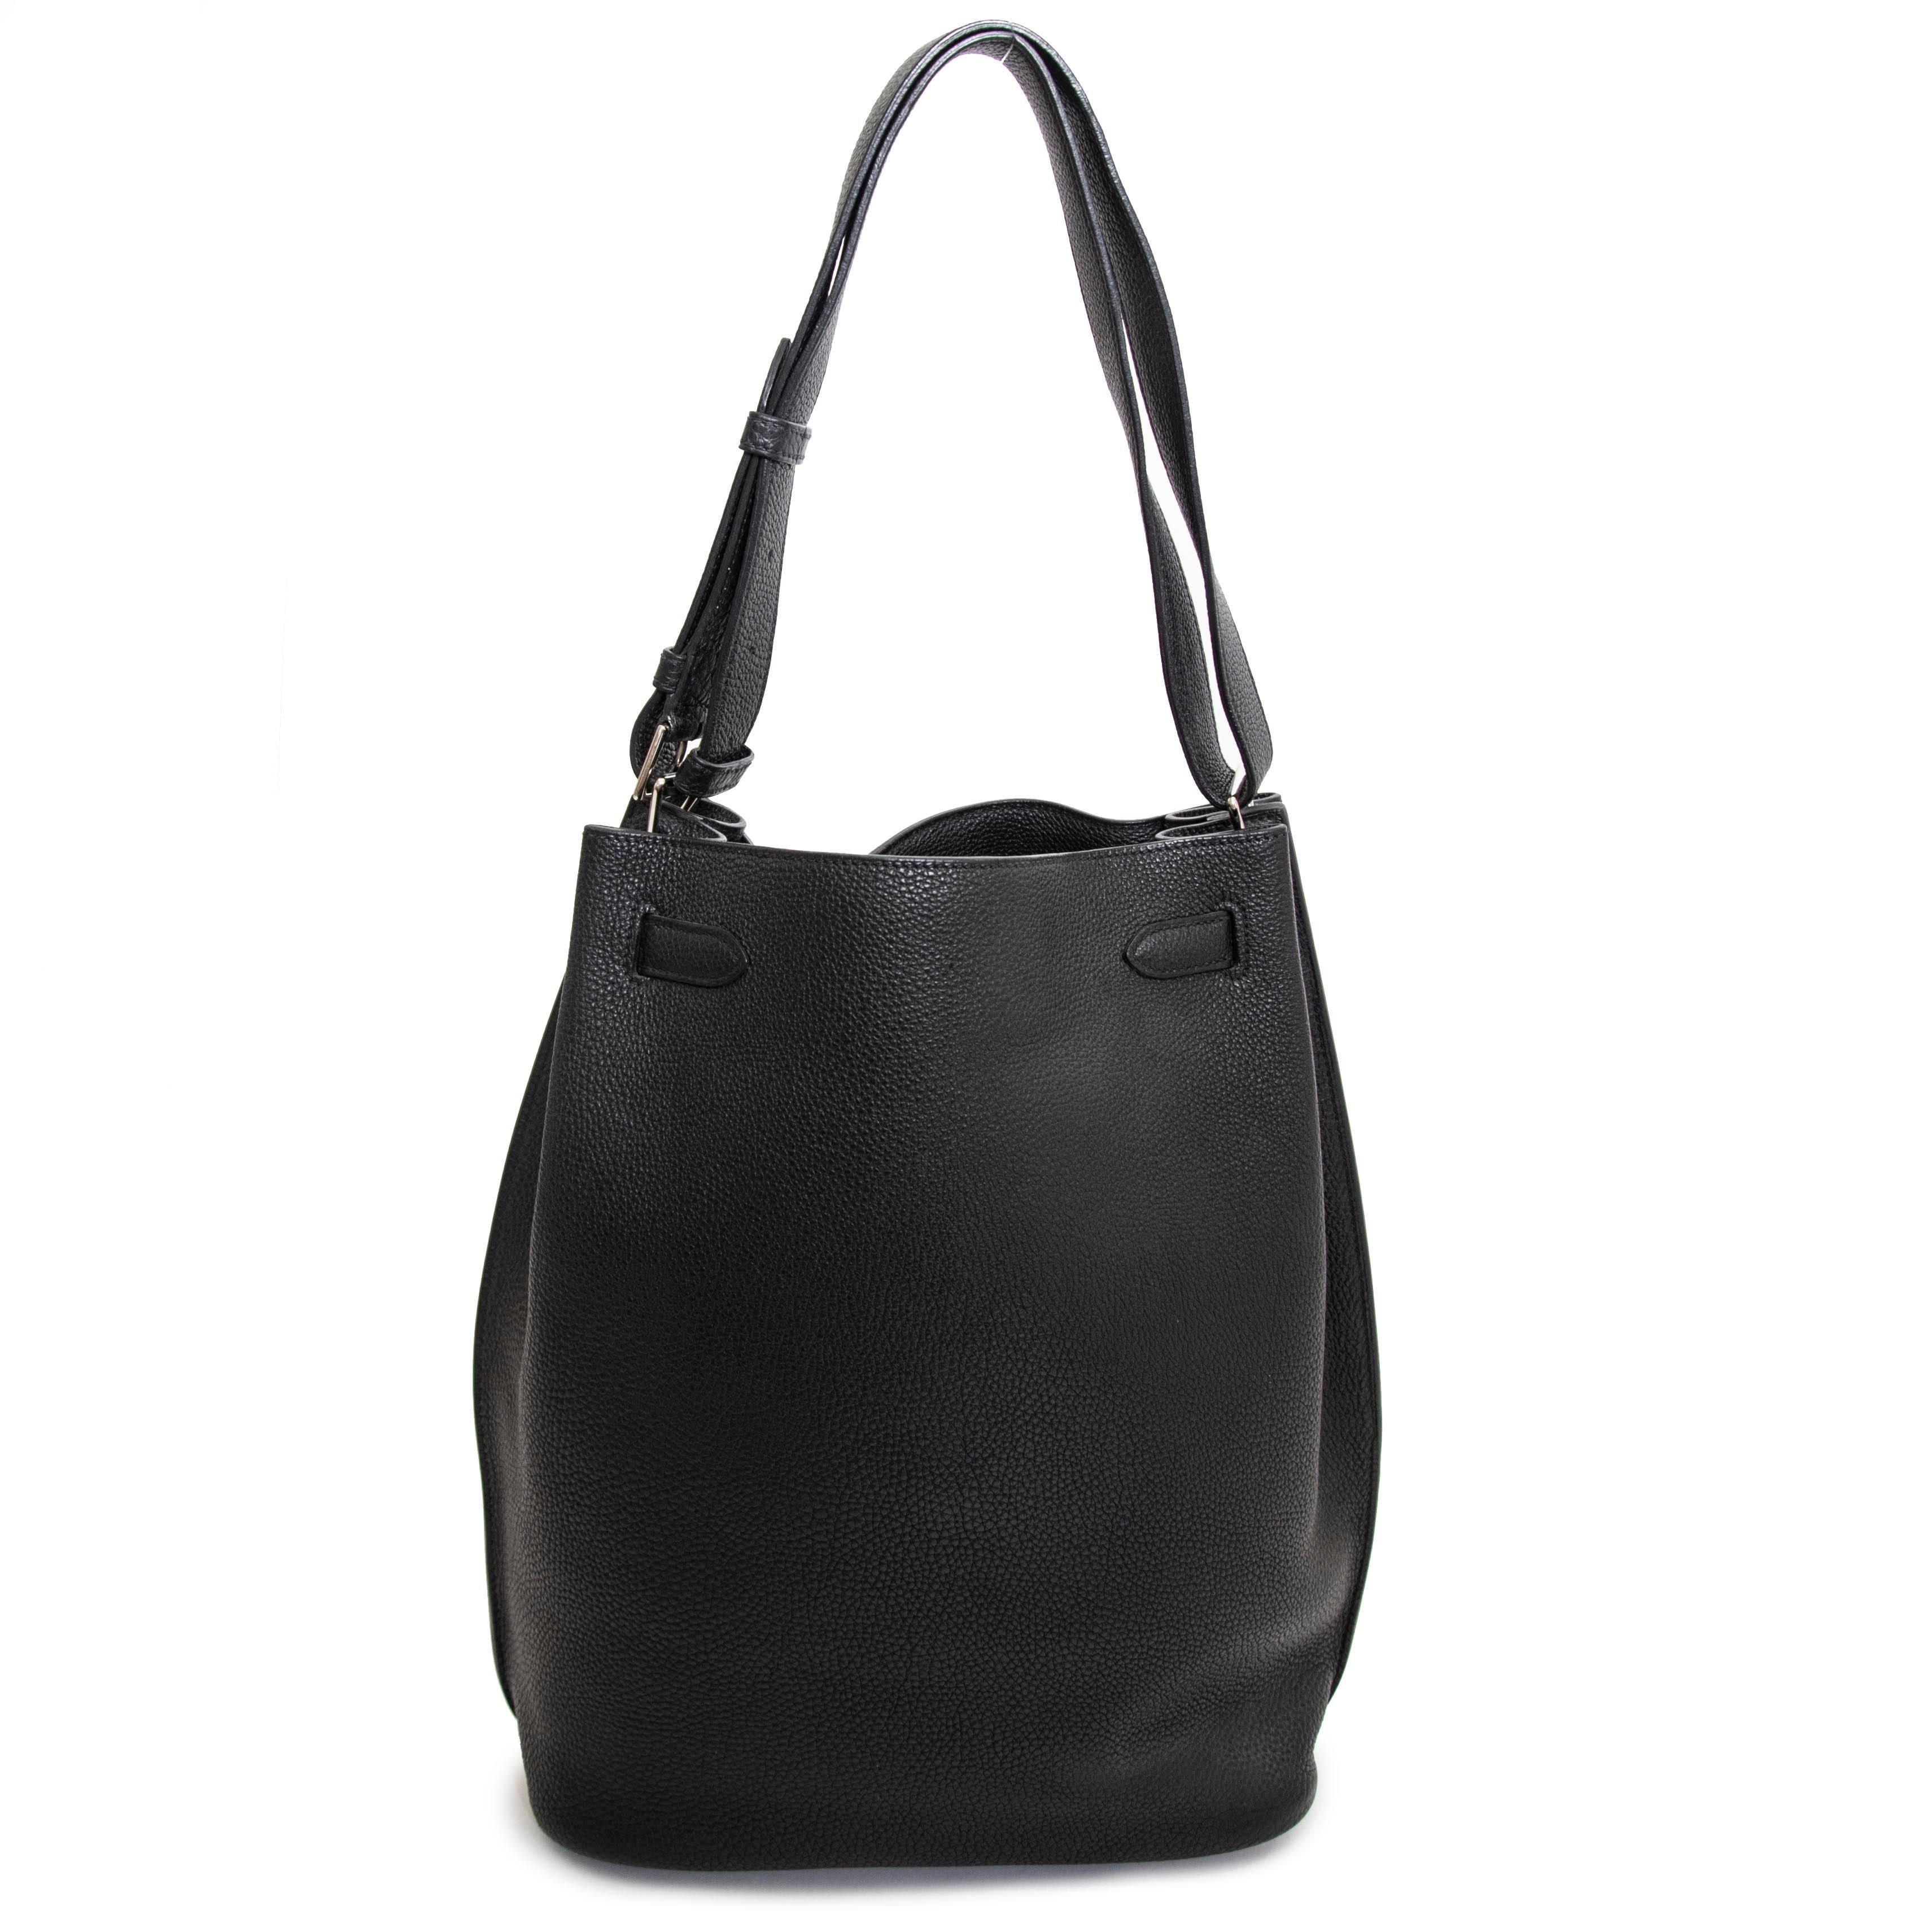 Good Condition

Hermes So Kelly Black Togo Shoulder Bag

If you love hobo’s or bucket bags, then please pay close attention to this fabulous So Kelly Shoulder bag.
The So Kelly was first introduced back in 2008. The bag comes with an adjustable